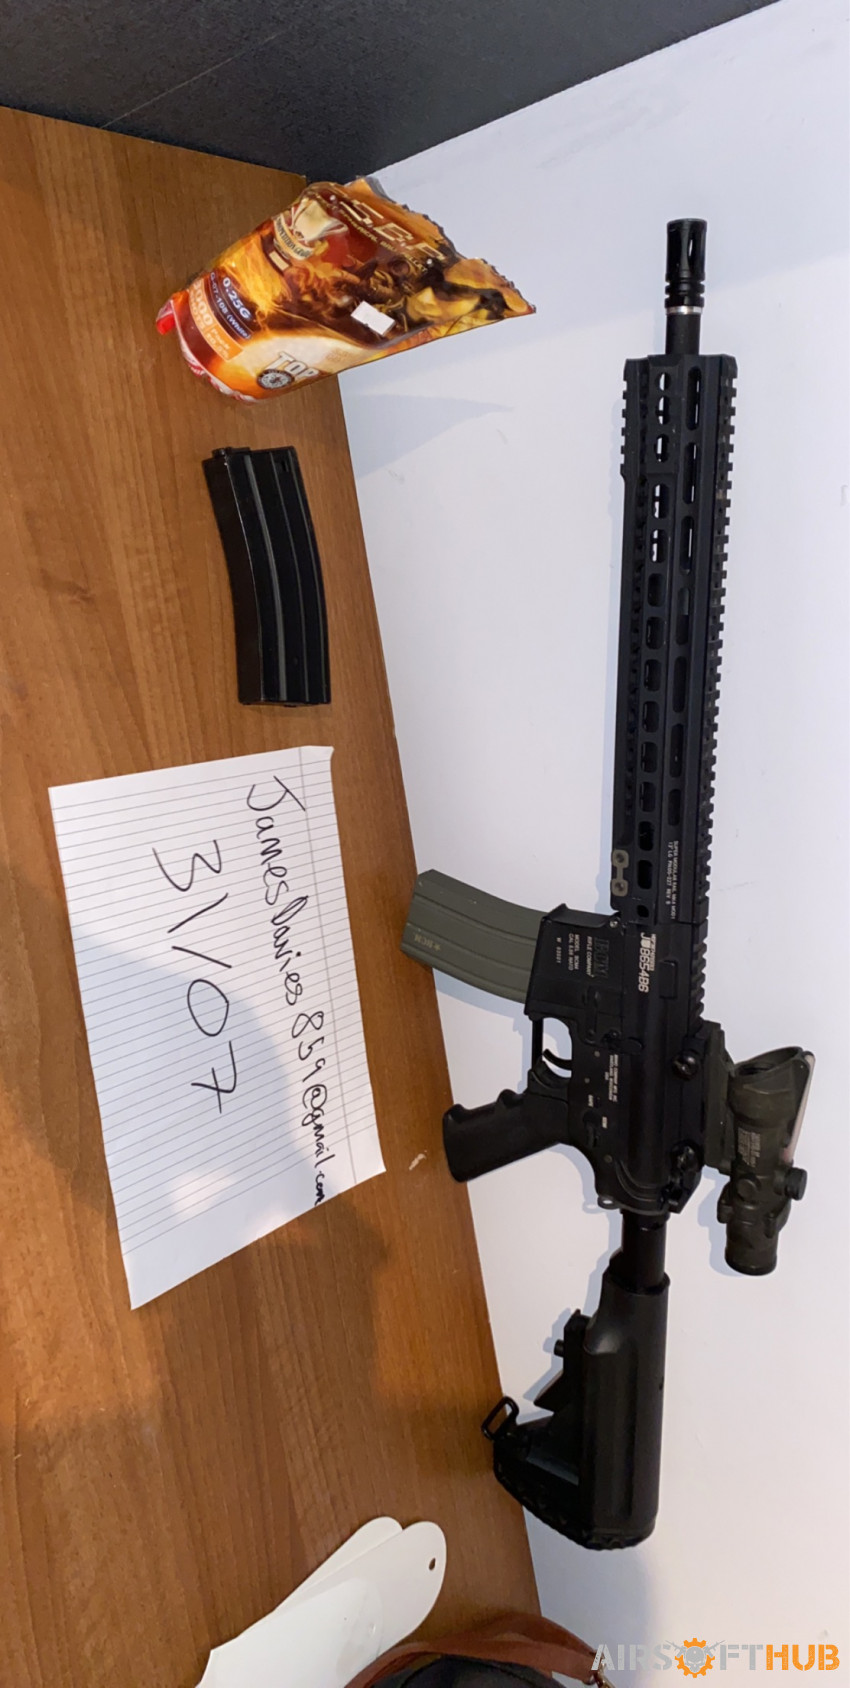 BCM M4(fully metal) - Used airsoft equipment